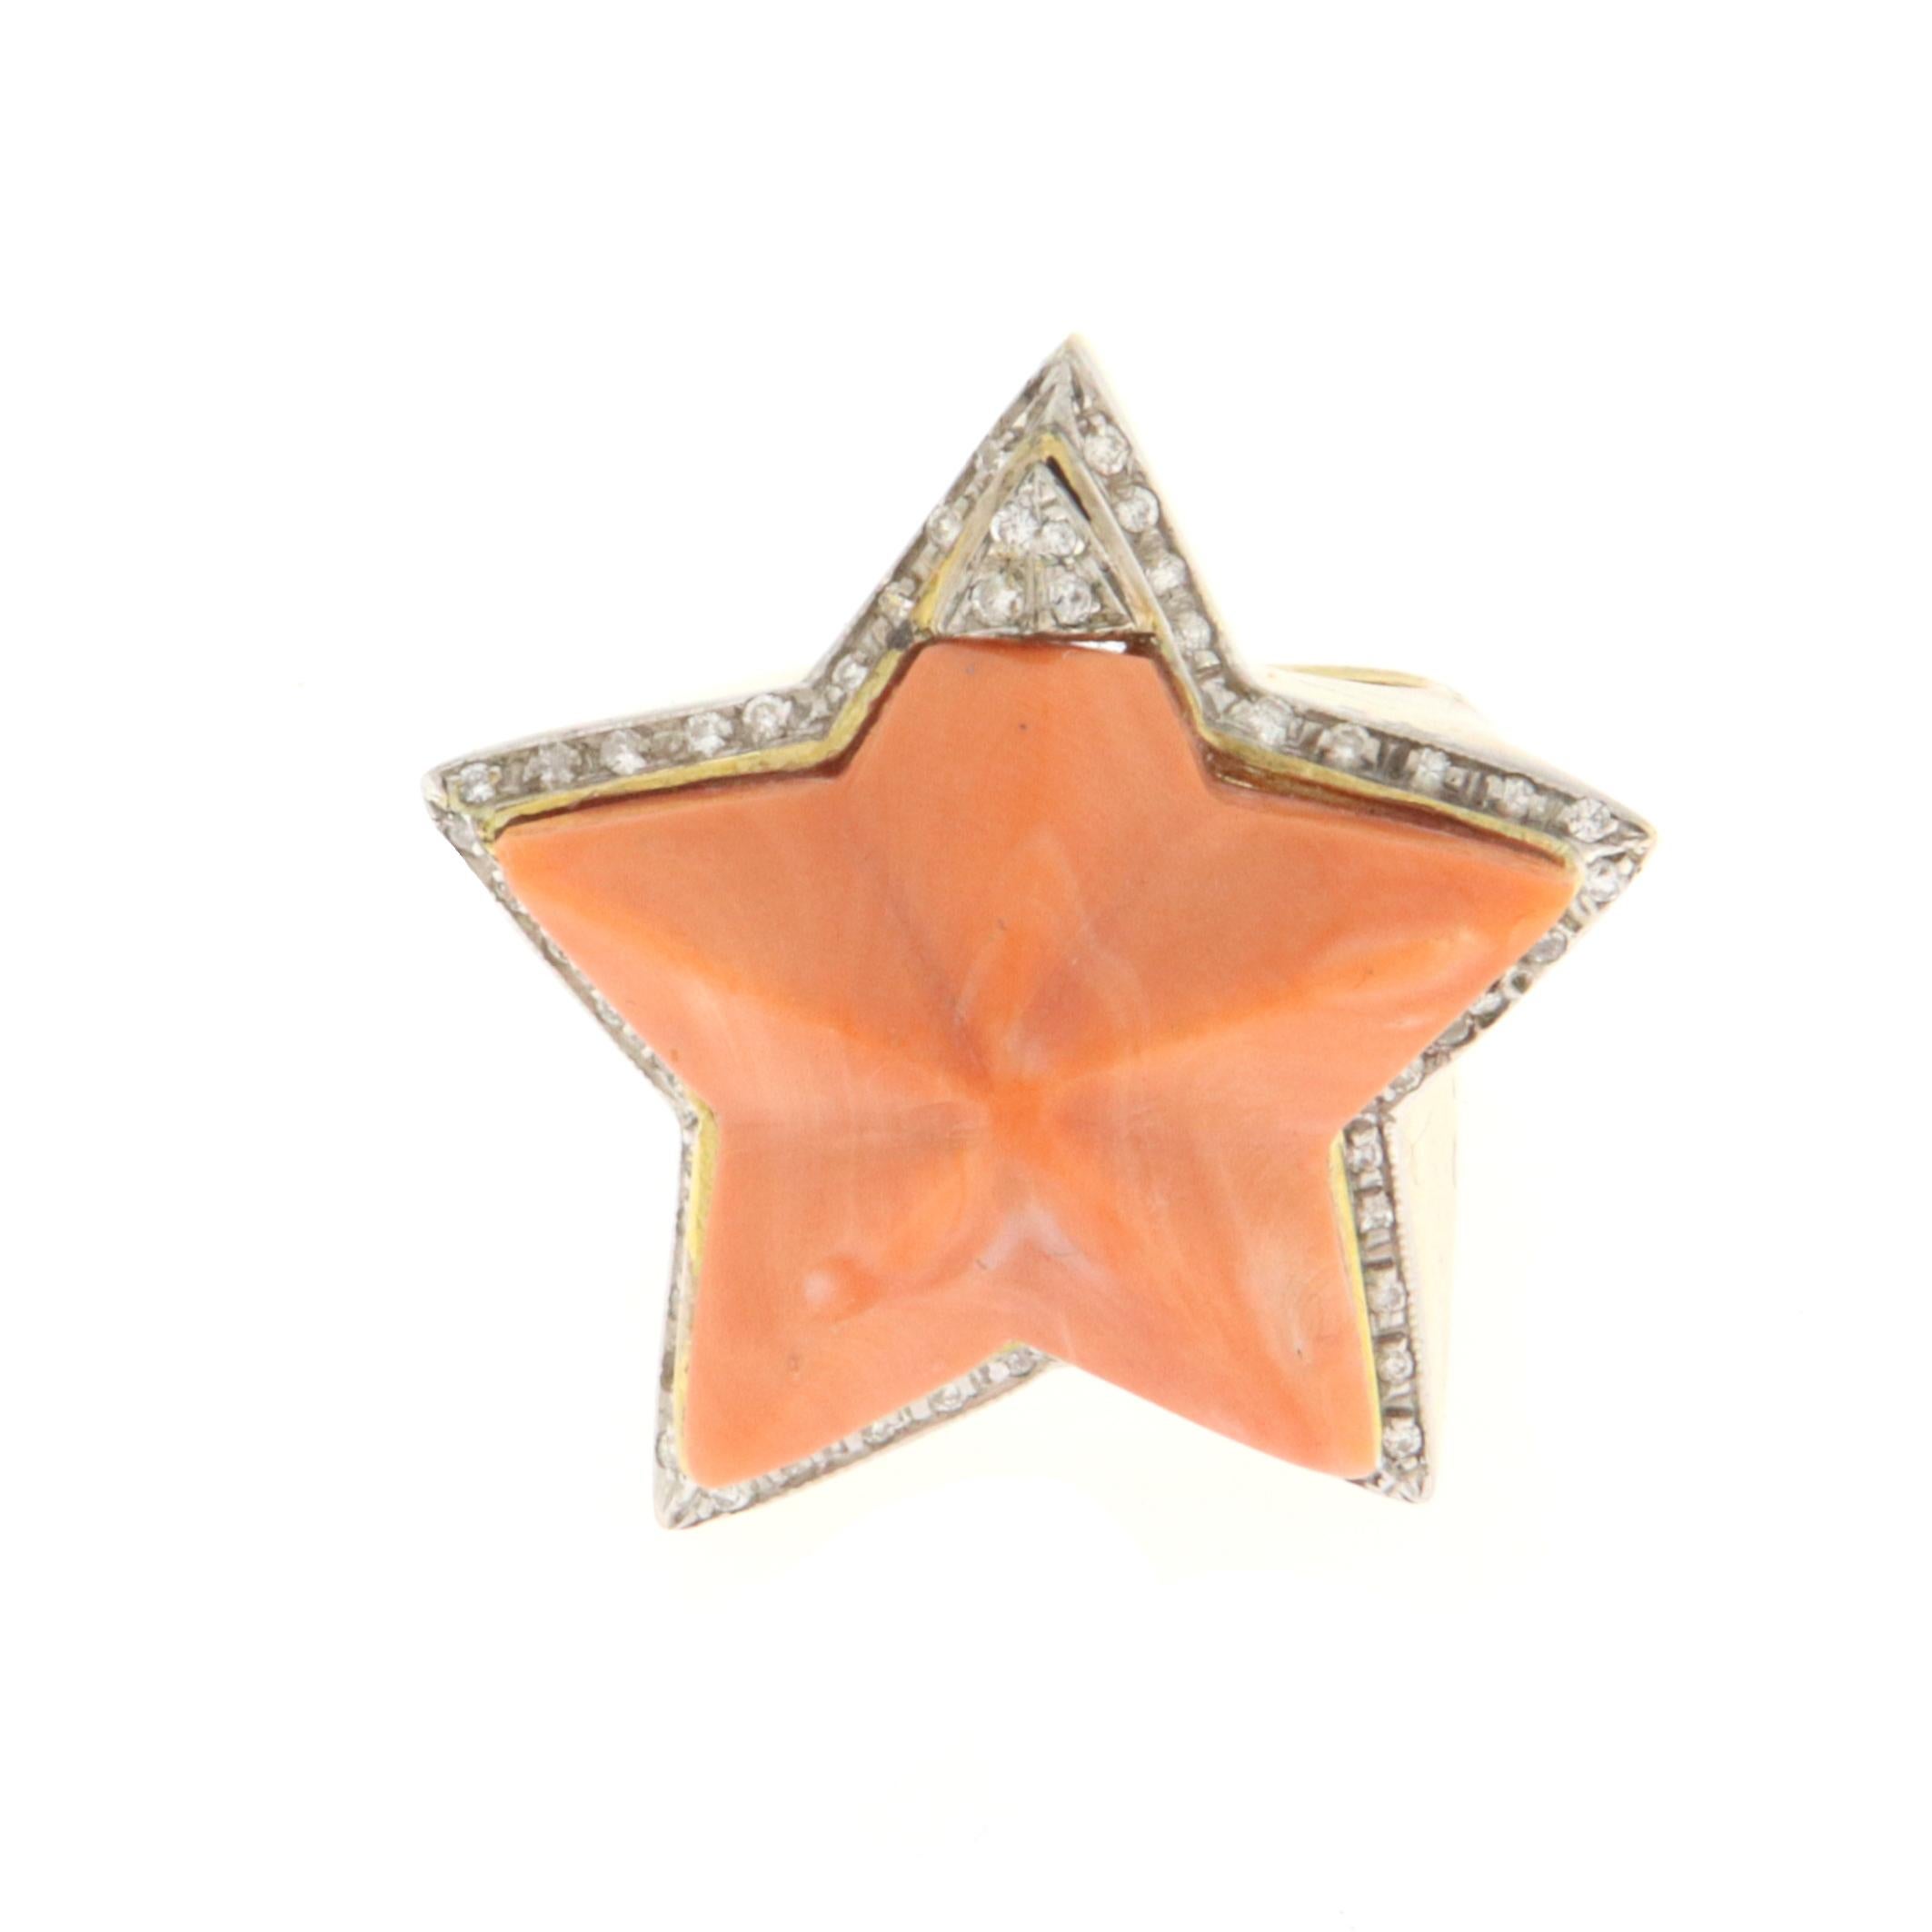 This 18-karat yellow gold ring is a true work of art, combining timeless elegance of gold with the uniqueness of a star-shaped natural coral. At the center, the intense red coral captures the eye, symbolizing passion and vitality, while the star cut